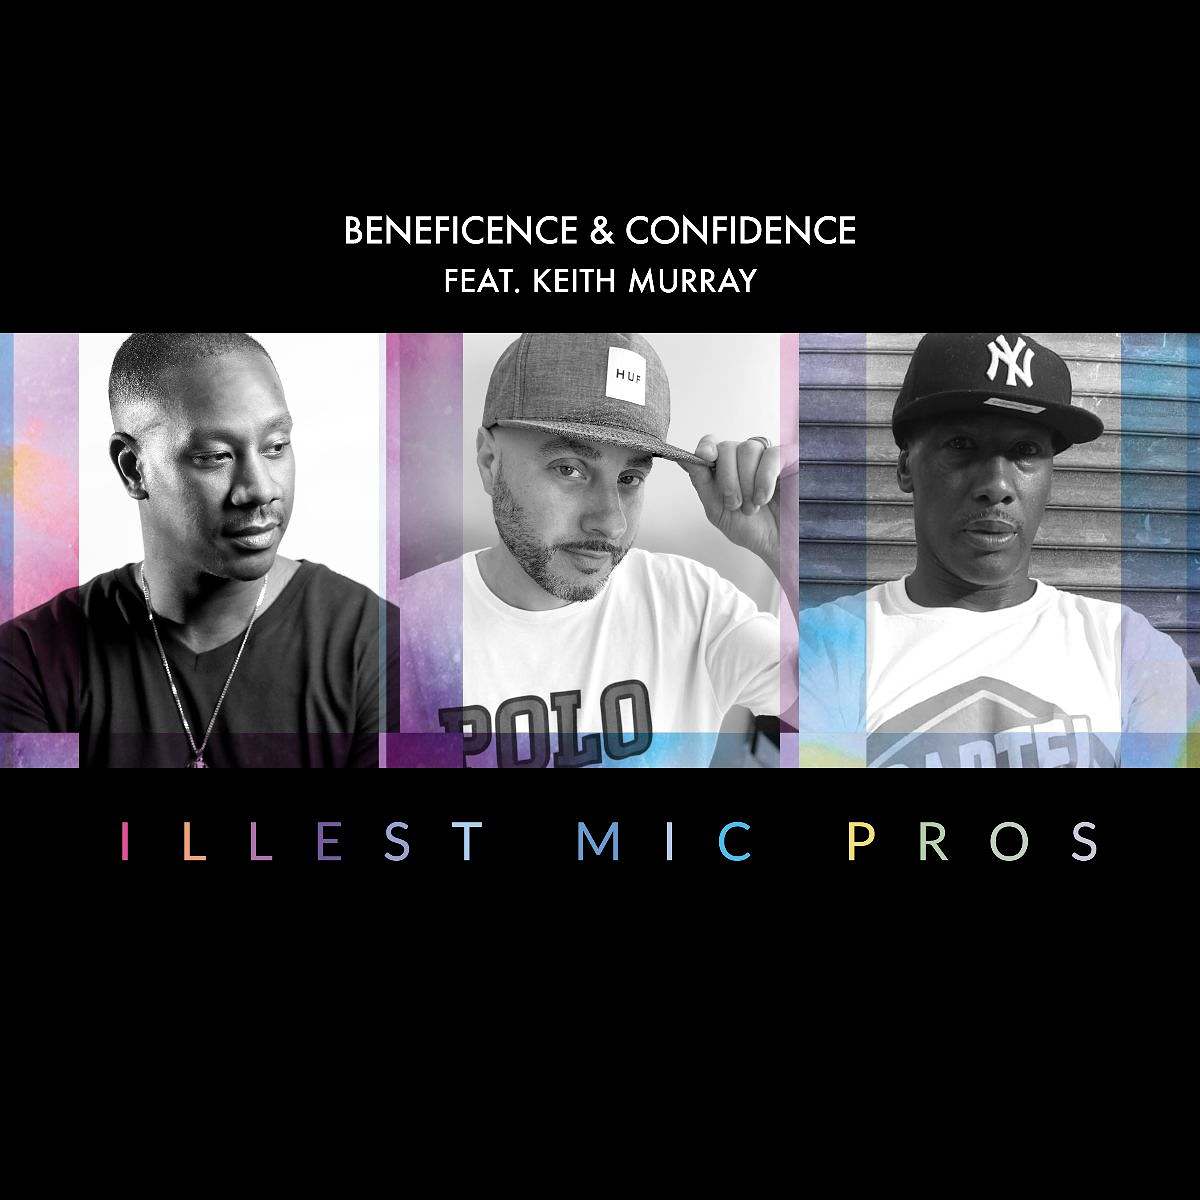 Video: Beneficence & Confidence feat. Keith Murray - Illest Mic Pros